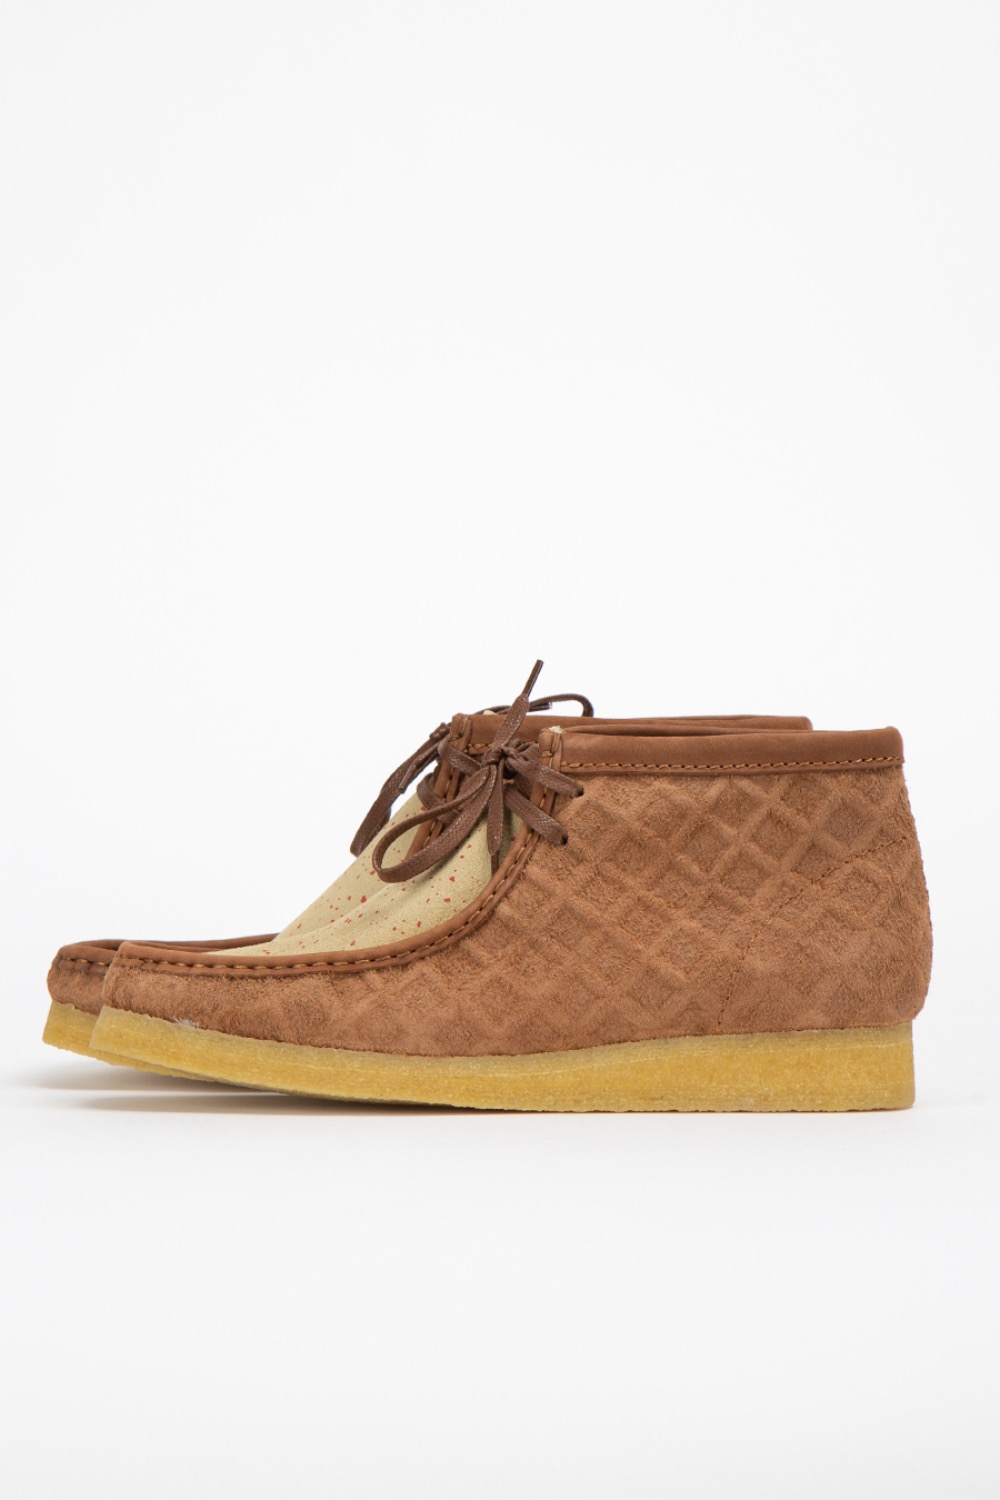 (SWEET CHICK) WALLABEE BOOT BROWN/RED